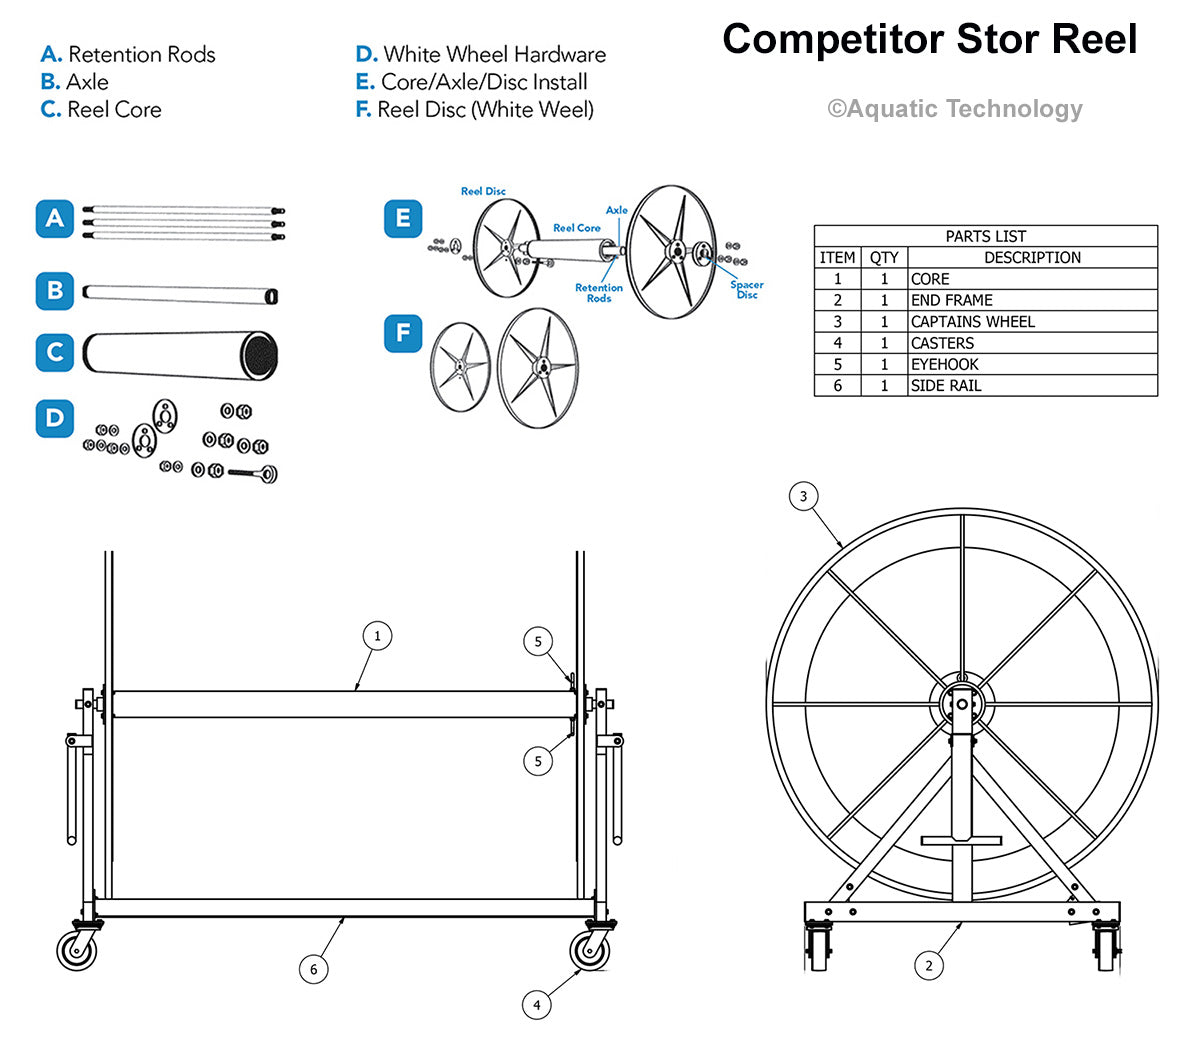 Competitor Stor Reel Parts